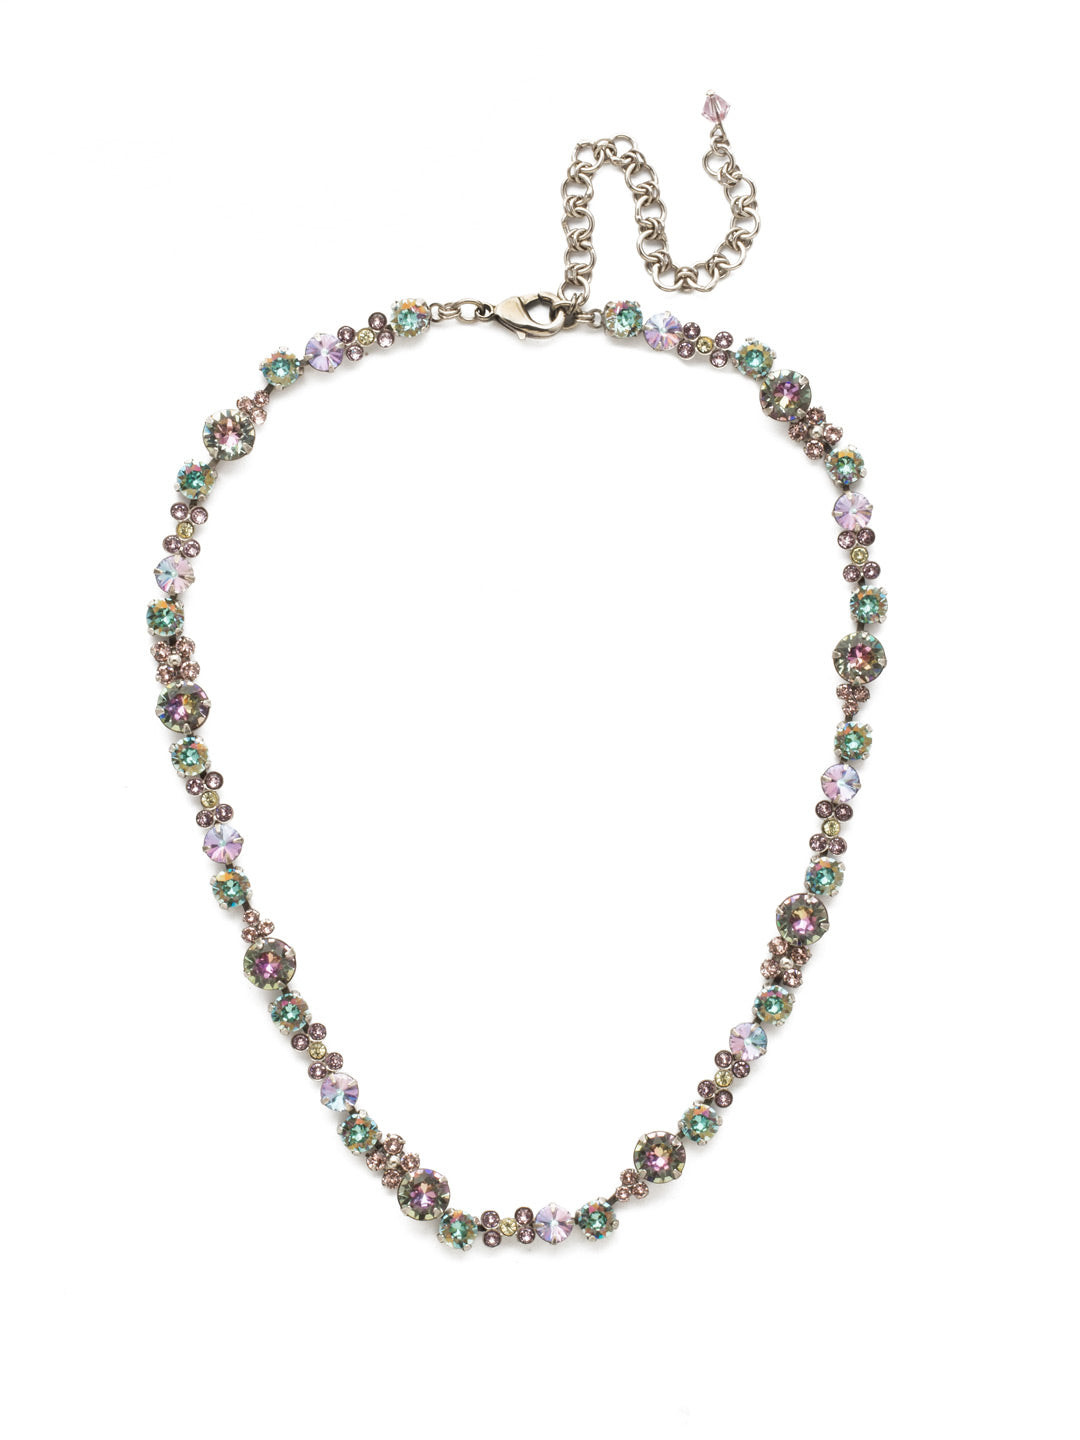 In Bloom Line Necklace - NDK10ASLPA - Put some spring in your step! This classic necklace features a combination of round and floral cluster crystals to add a sweet romantic touch to your everyday look.